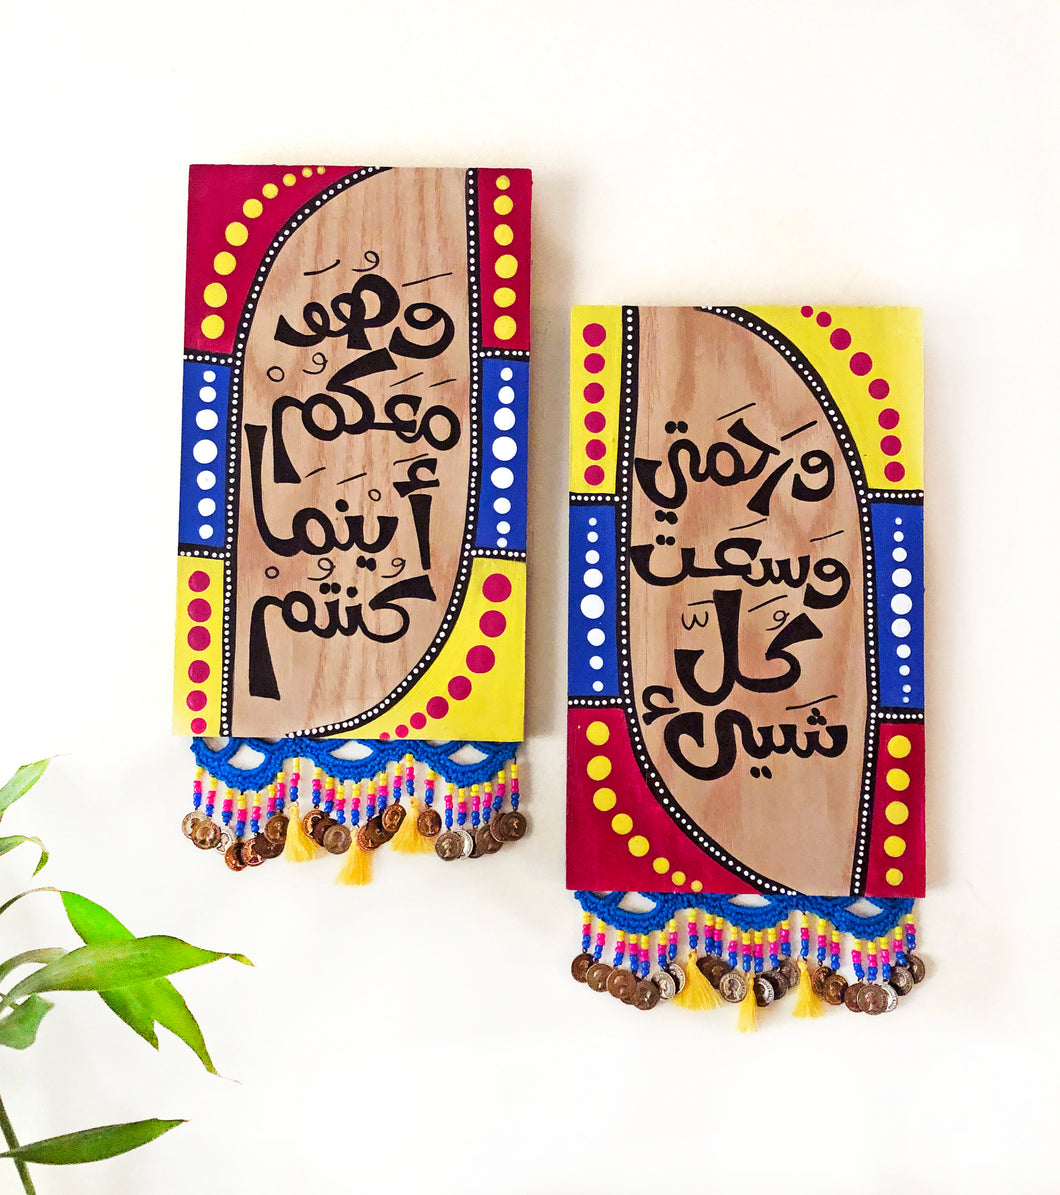 Set of 2 Handmade Wooden Wall Decorations with Arabic Calligraphy and Vibrant Accents